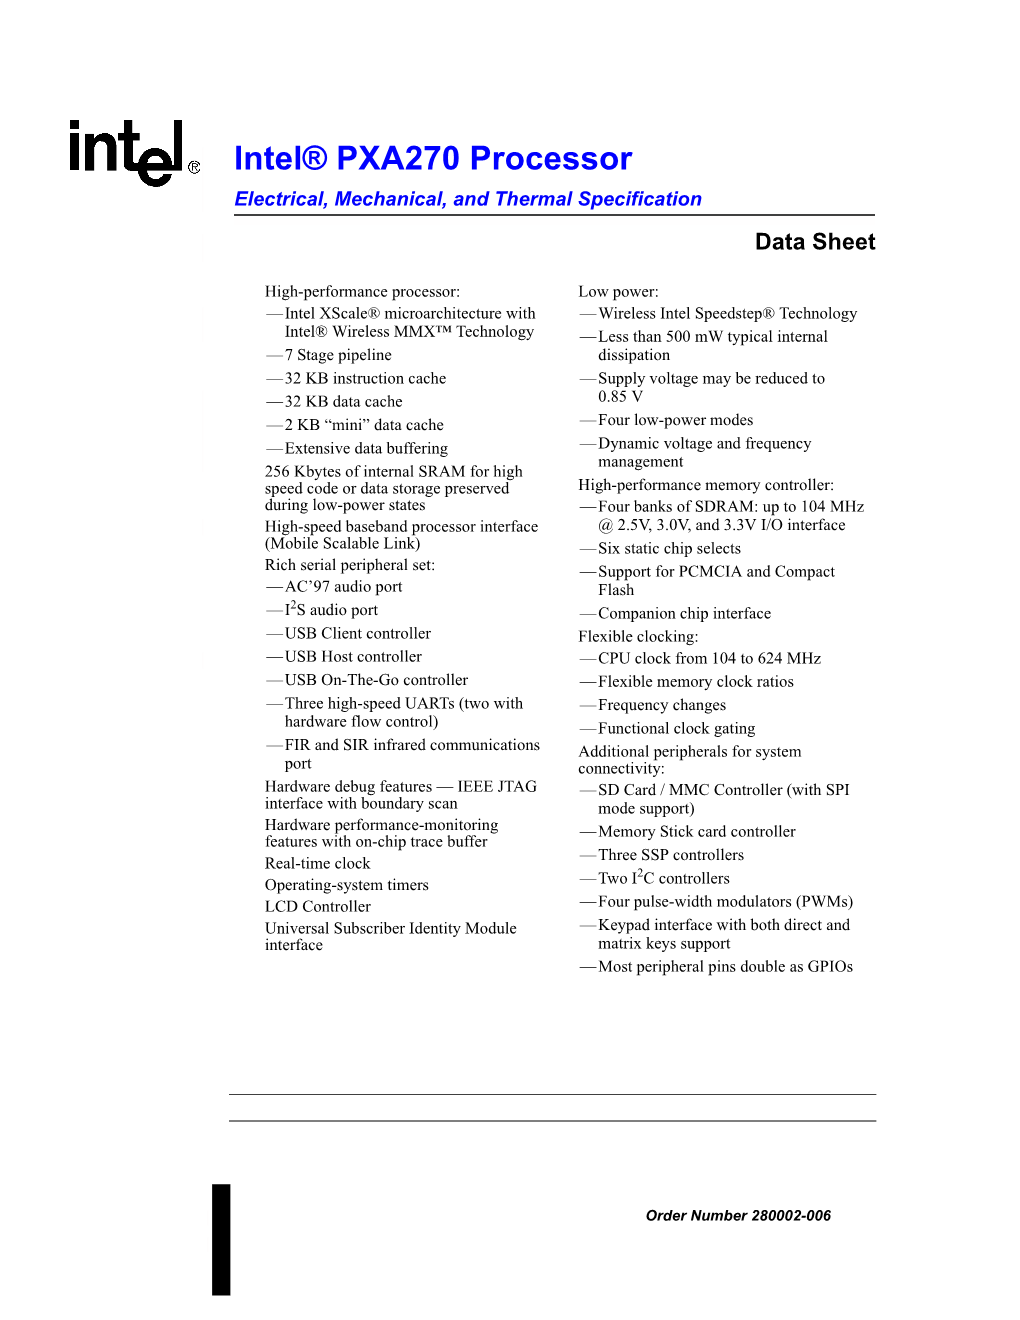 Intel® PXA270 Processor Electrical, Mechanical, and Thermal Specification Data Sheet